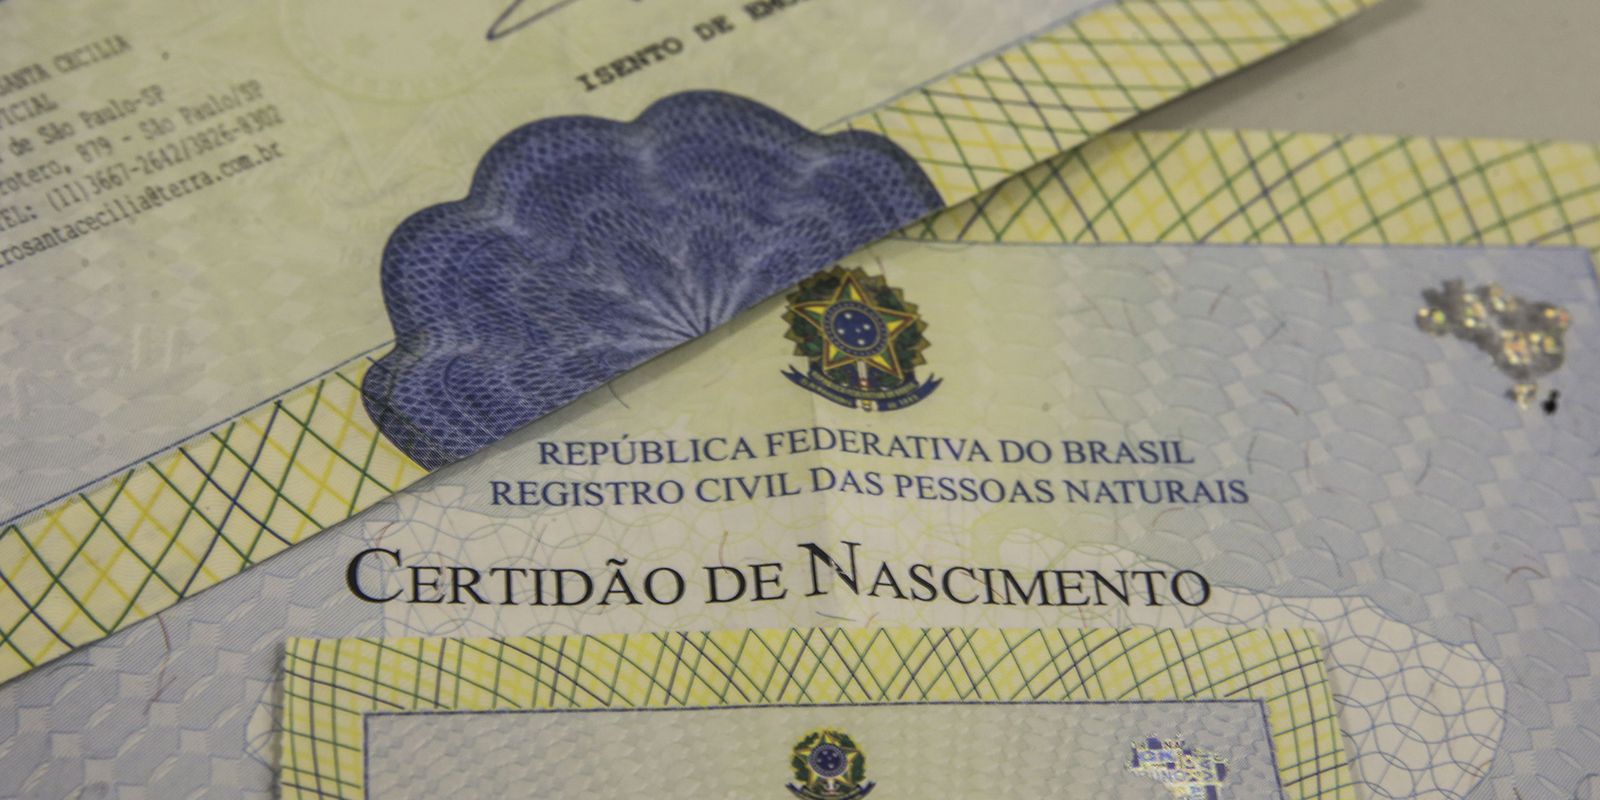 Brazil reduces underreporting of births and deaths, indicates IBGE